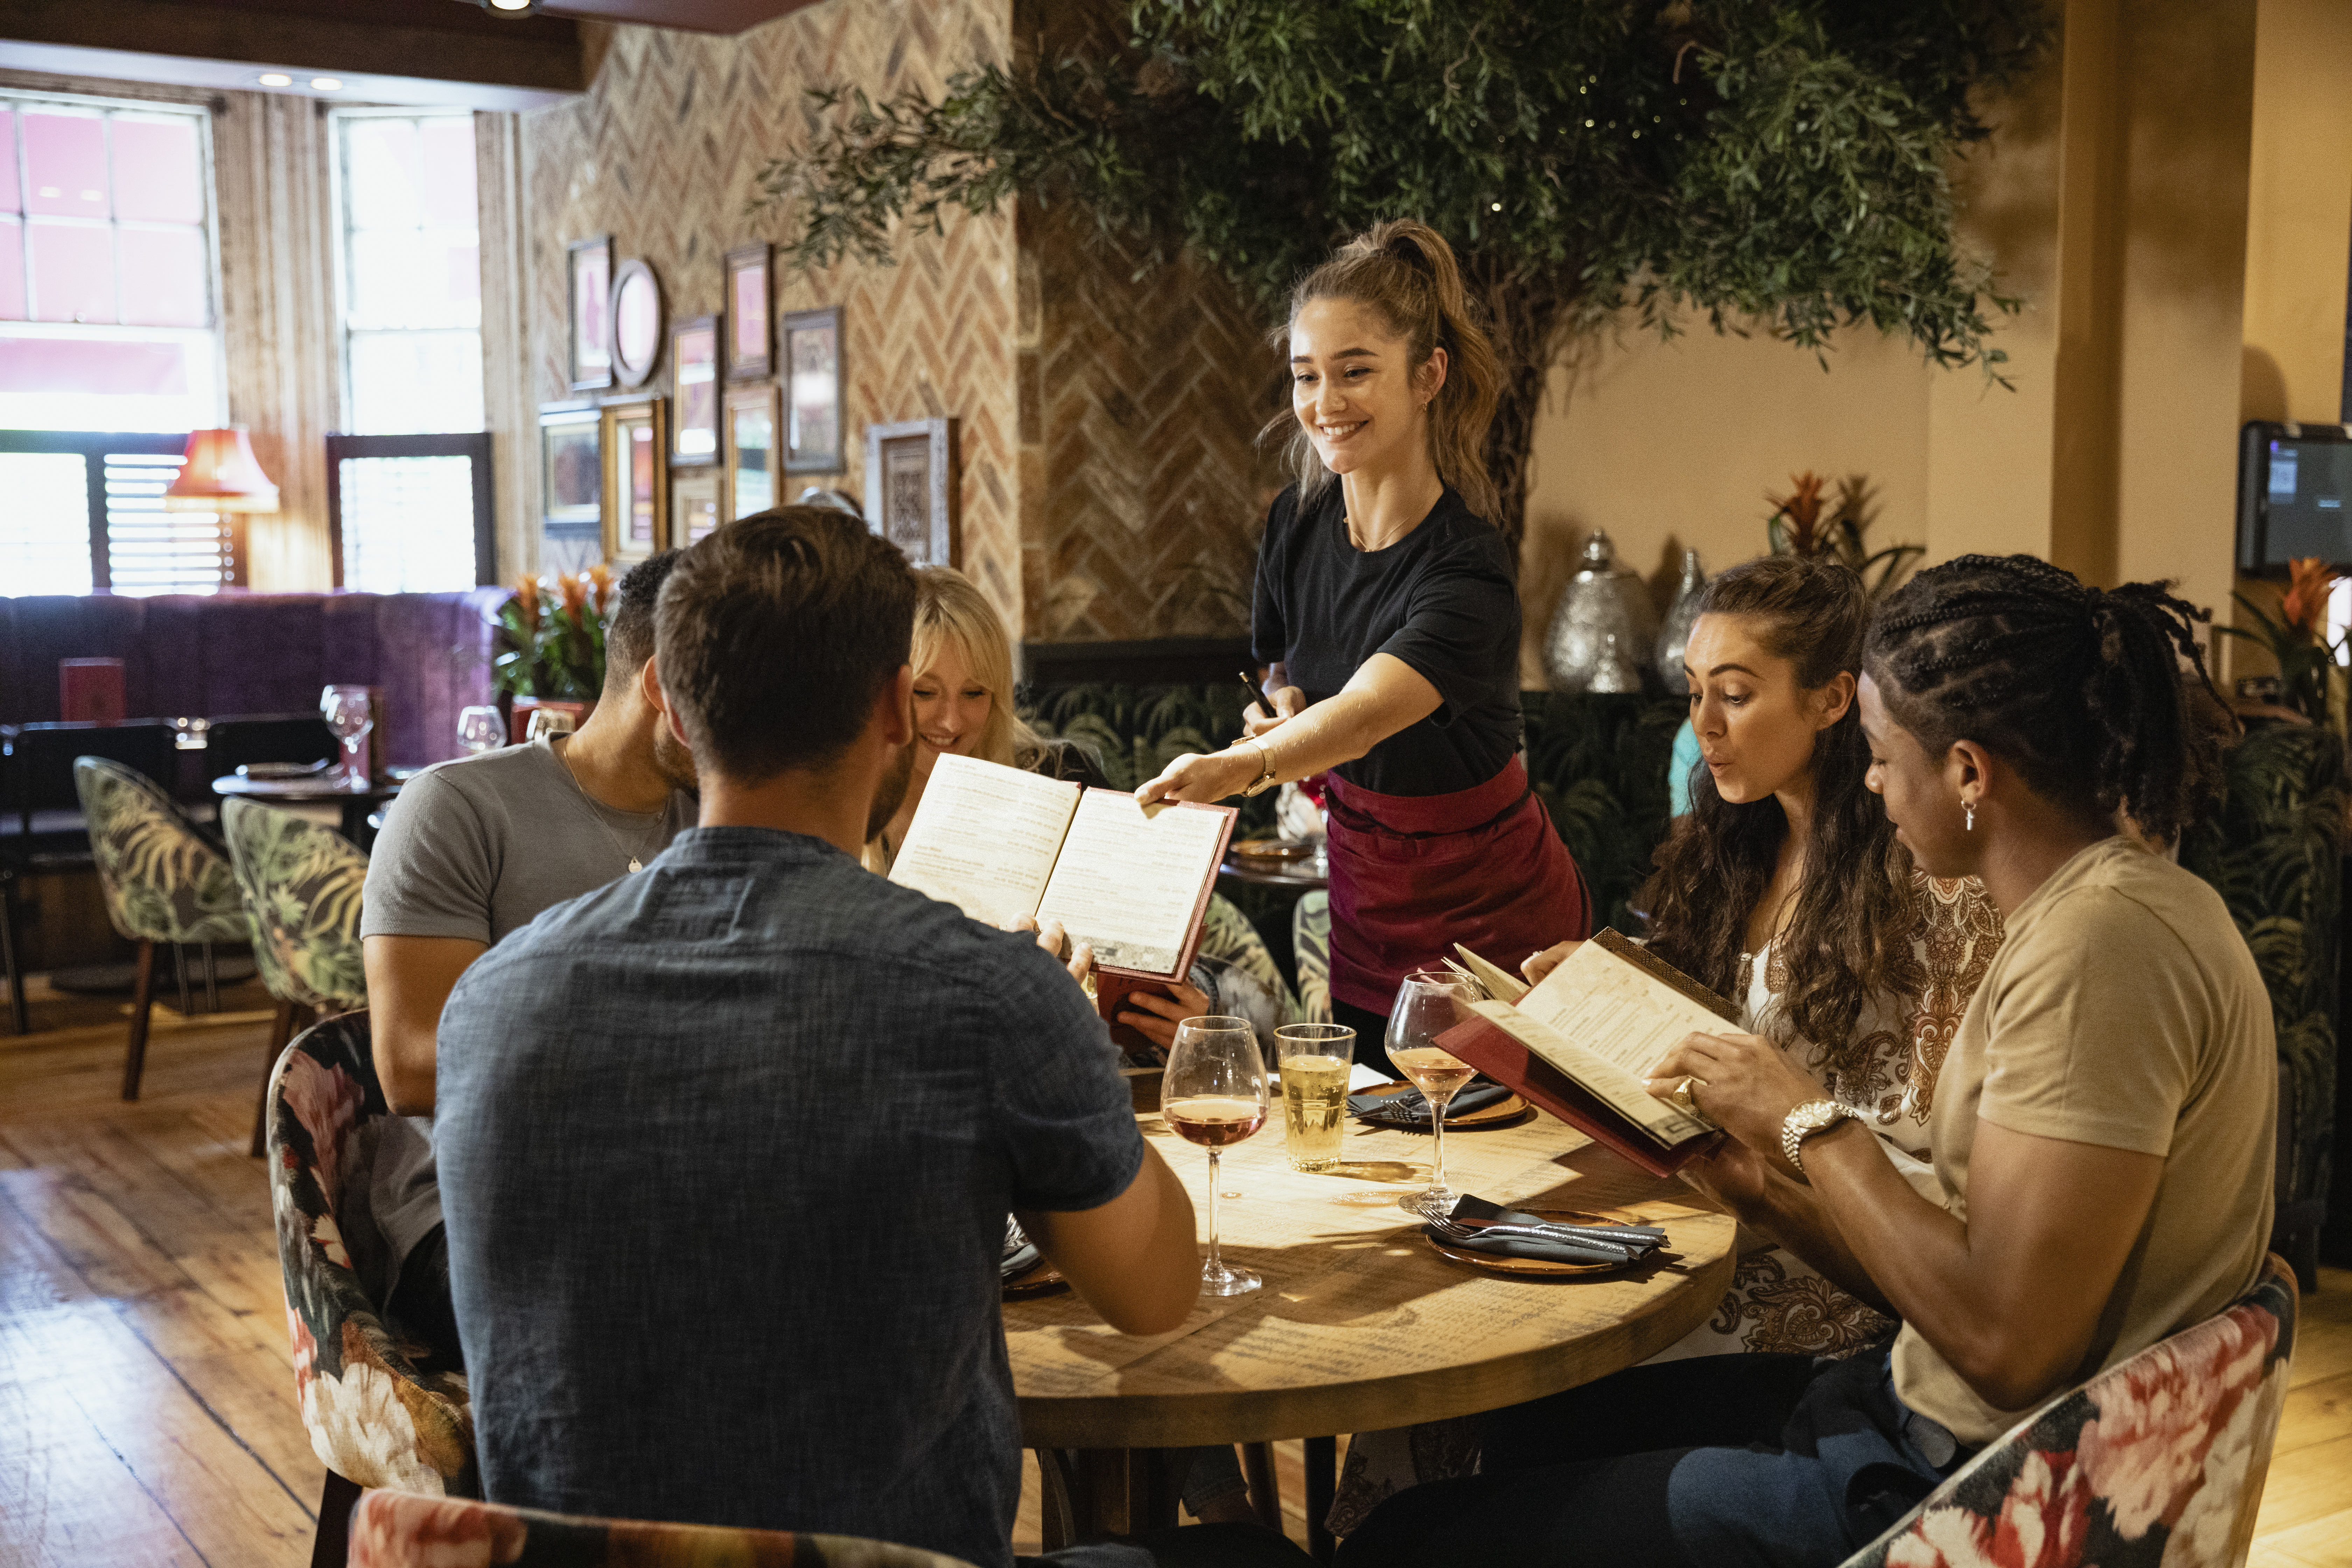 A waitress gives the menu to customers in a restaurant